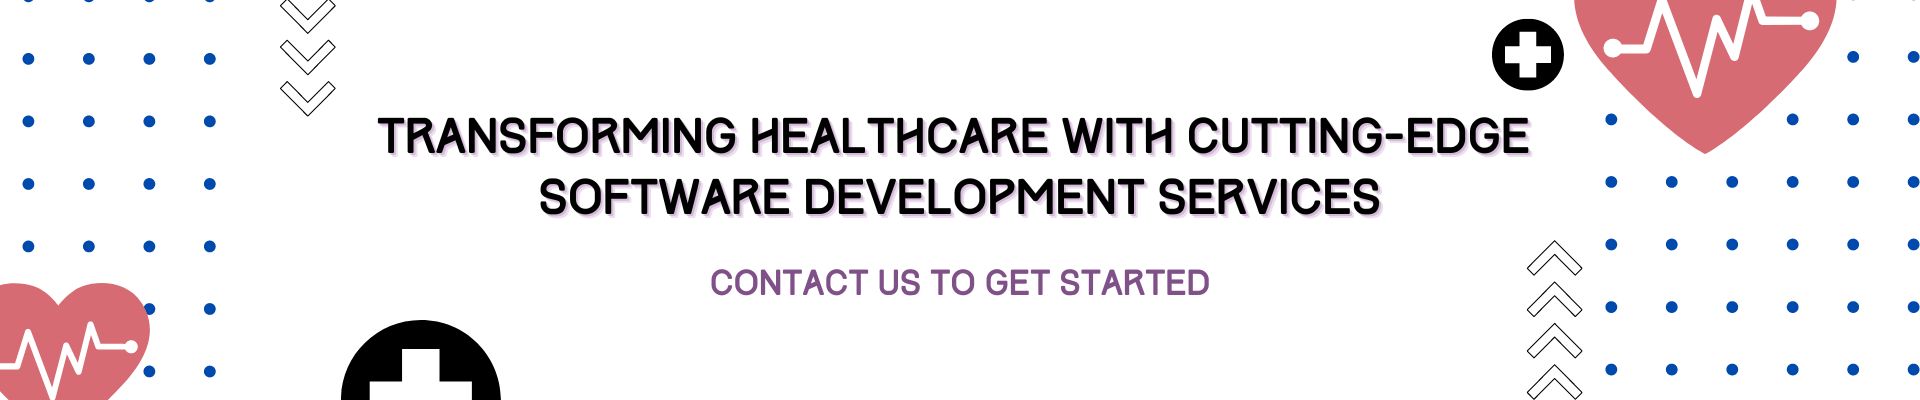 Easy-to-Use Custom Healthcare Software Development ad template